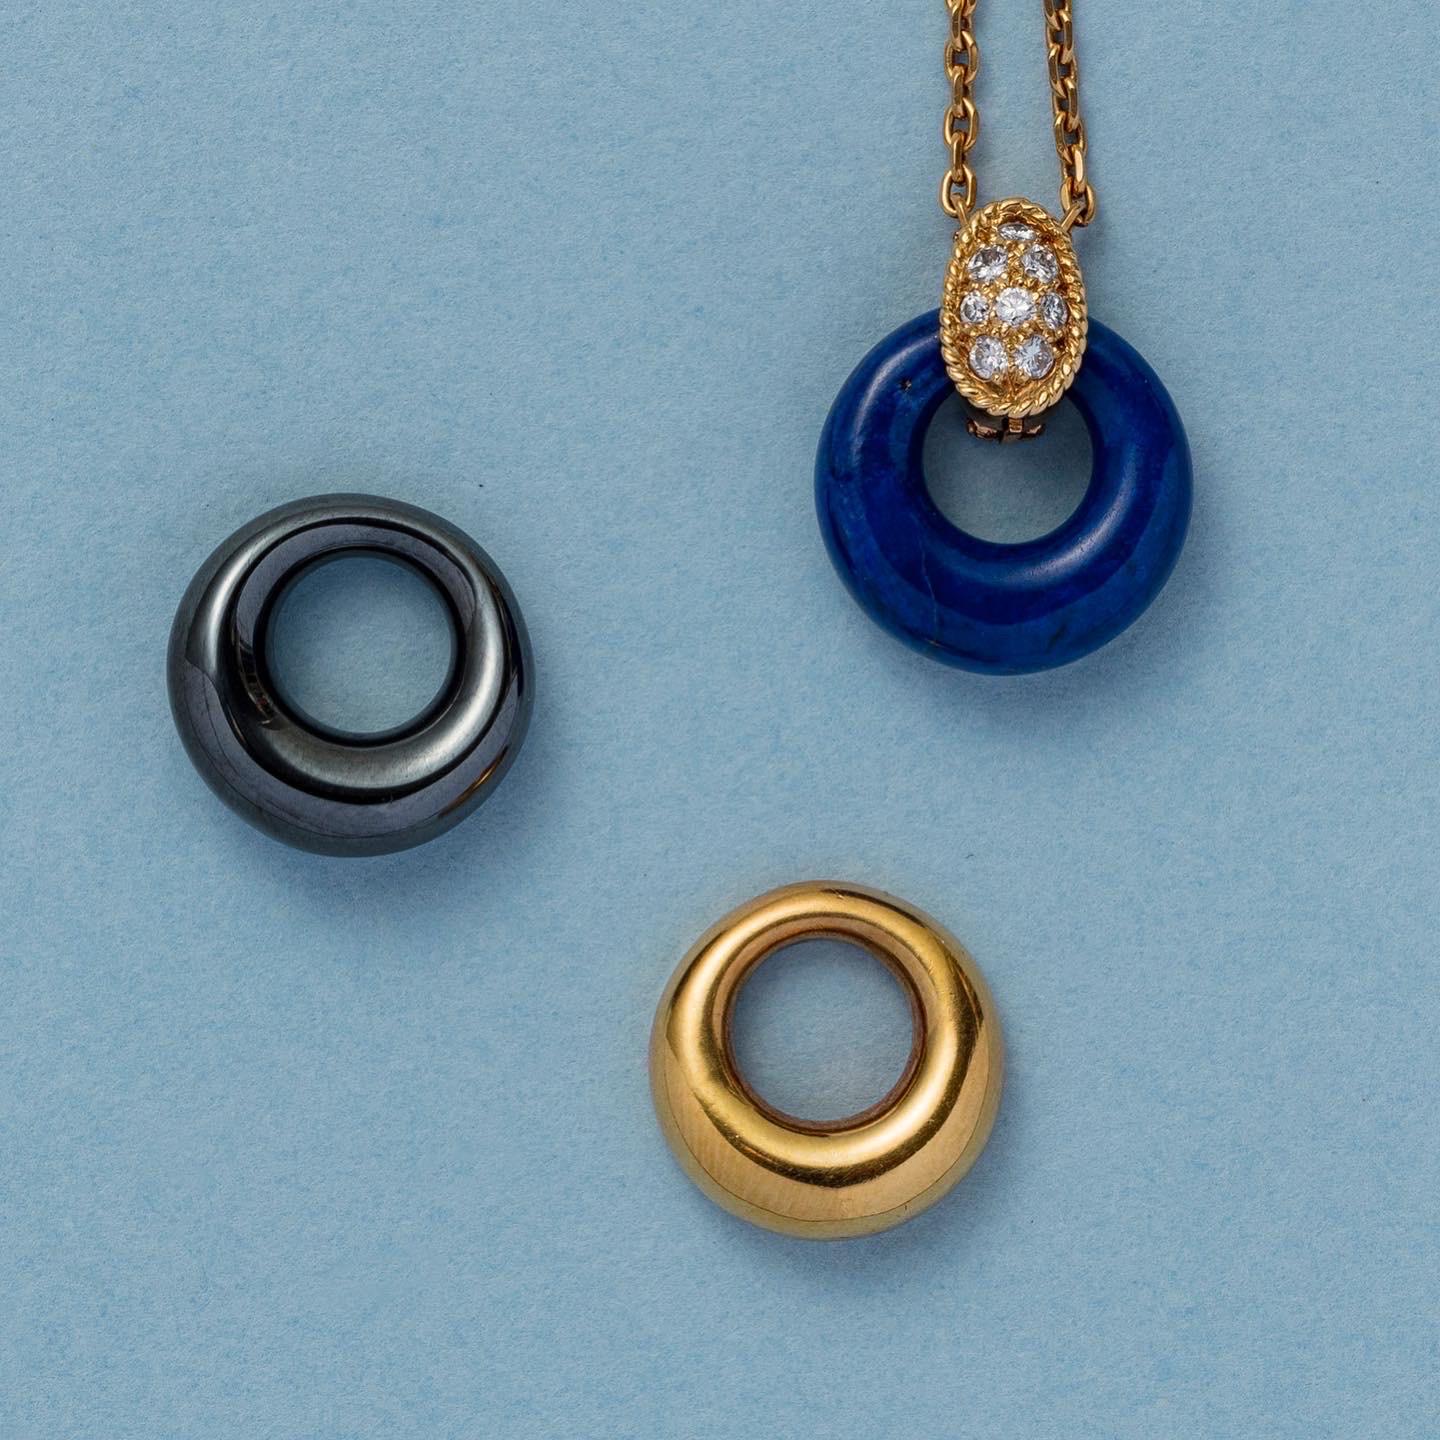 A super rare pendant version of the VCA Philippine collection. An 18 carat gold and diamond pendant with three interchangeable discs, one gold, one lapis and one hematite, signed and numbered: Van Cleef & Arpels, B4140A487, model: Philippine with